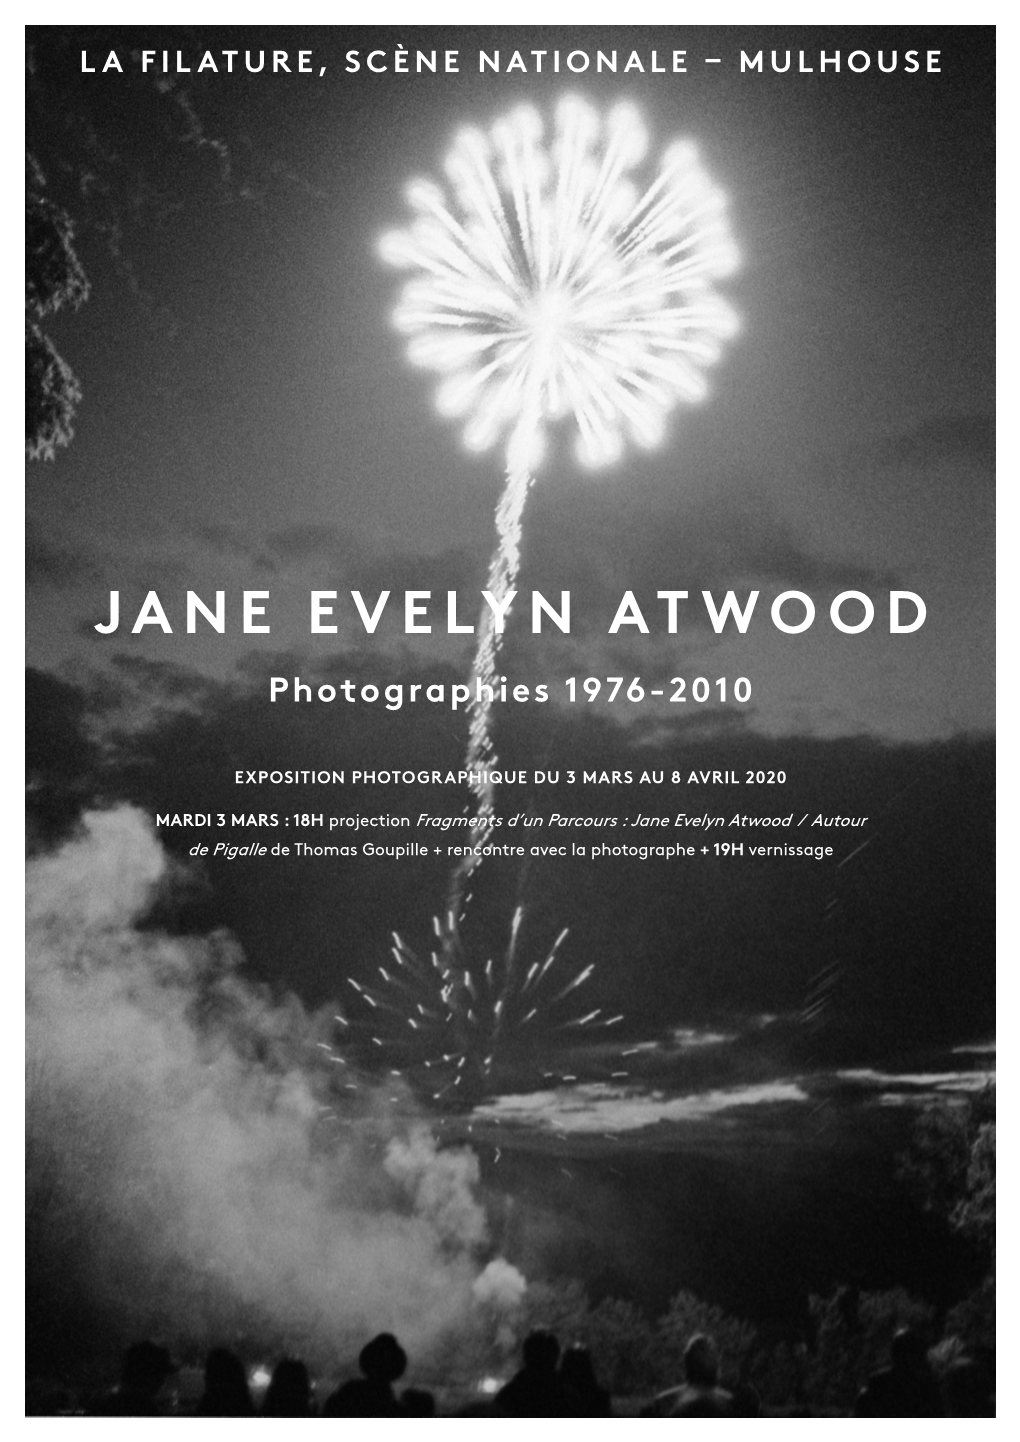 JANE EVELYN ATWOOD Photographies 1976-2010